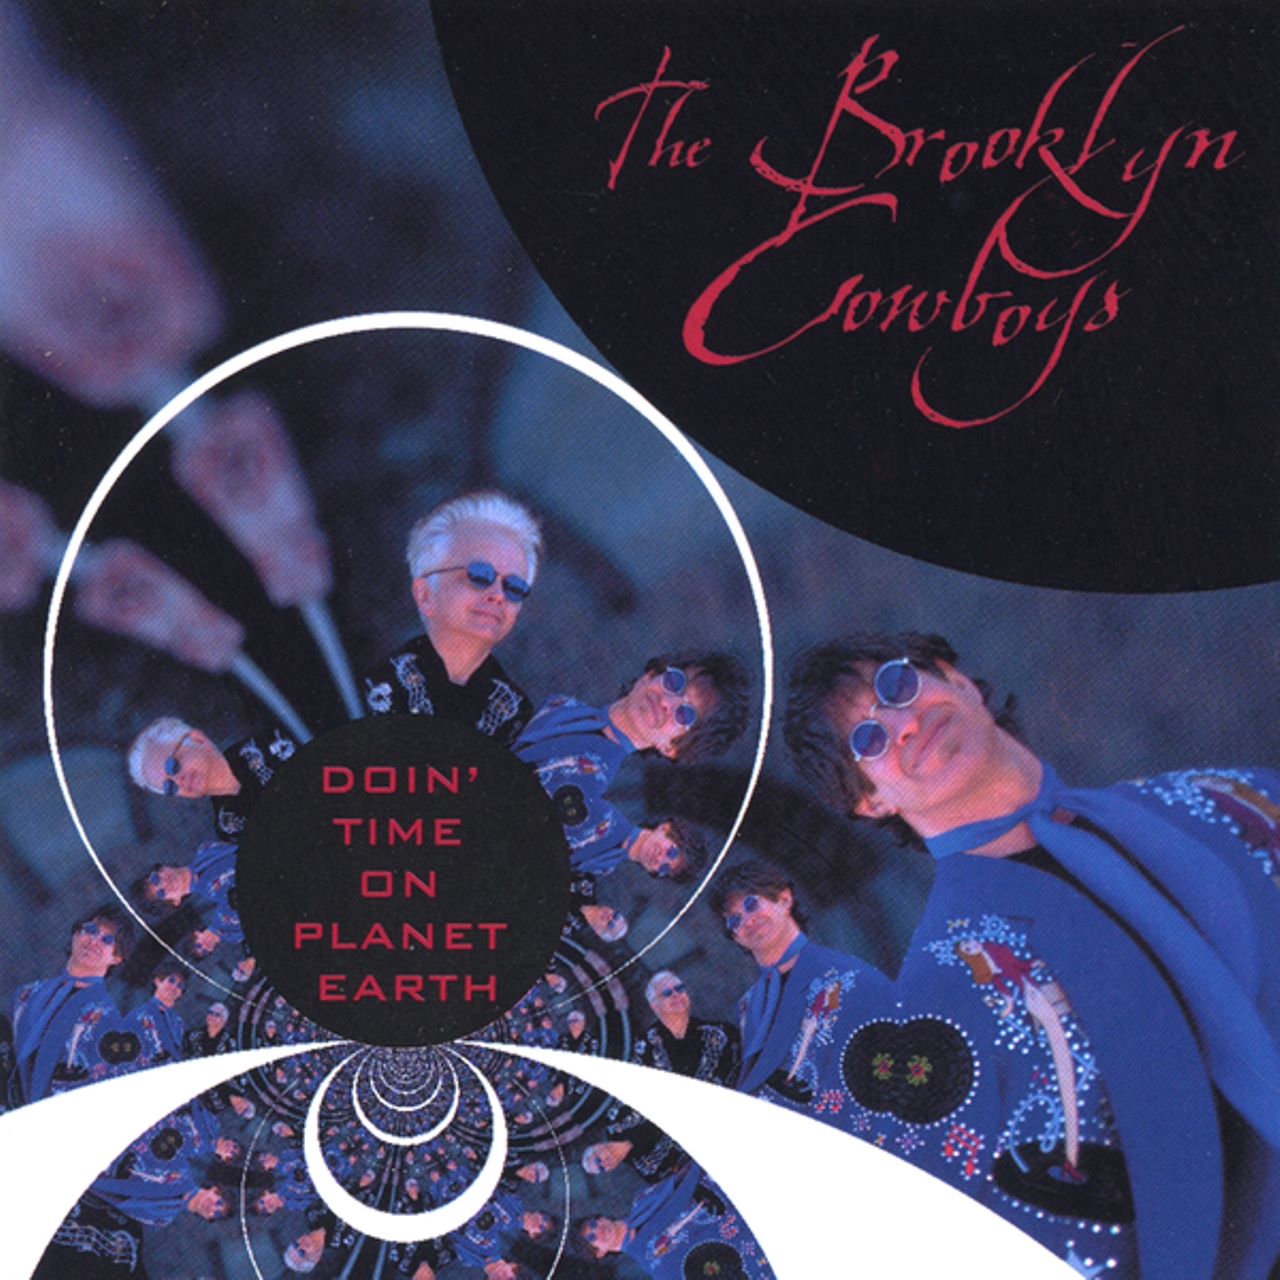 Brooklyn Cowboys - Doin' Time On Planet Earth cover album